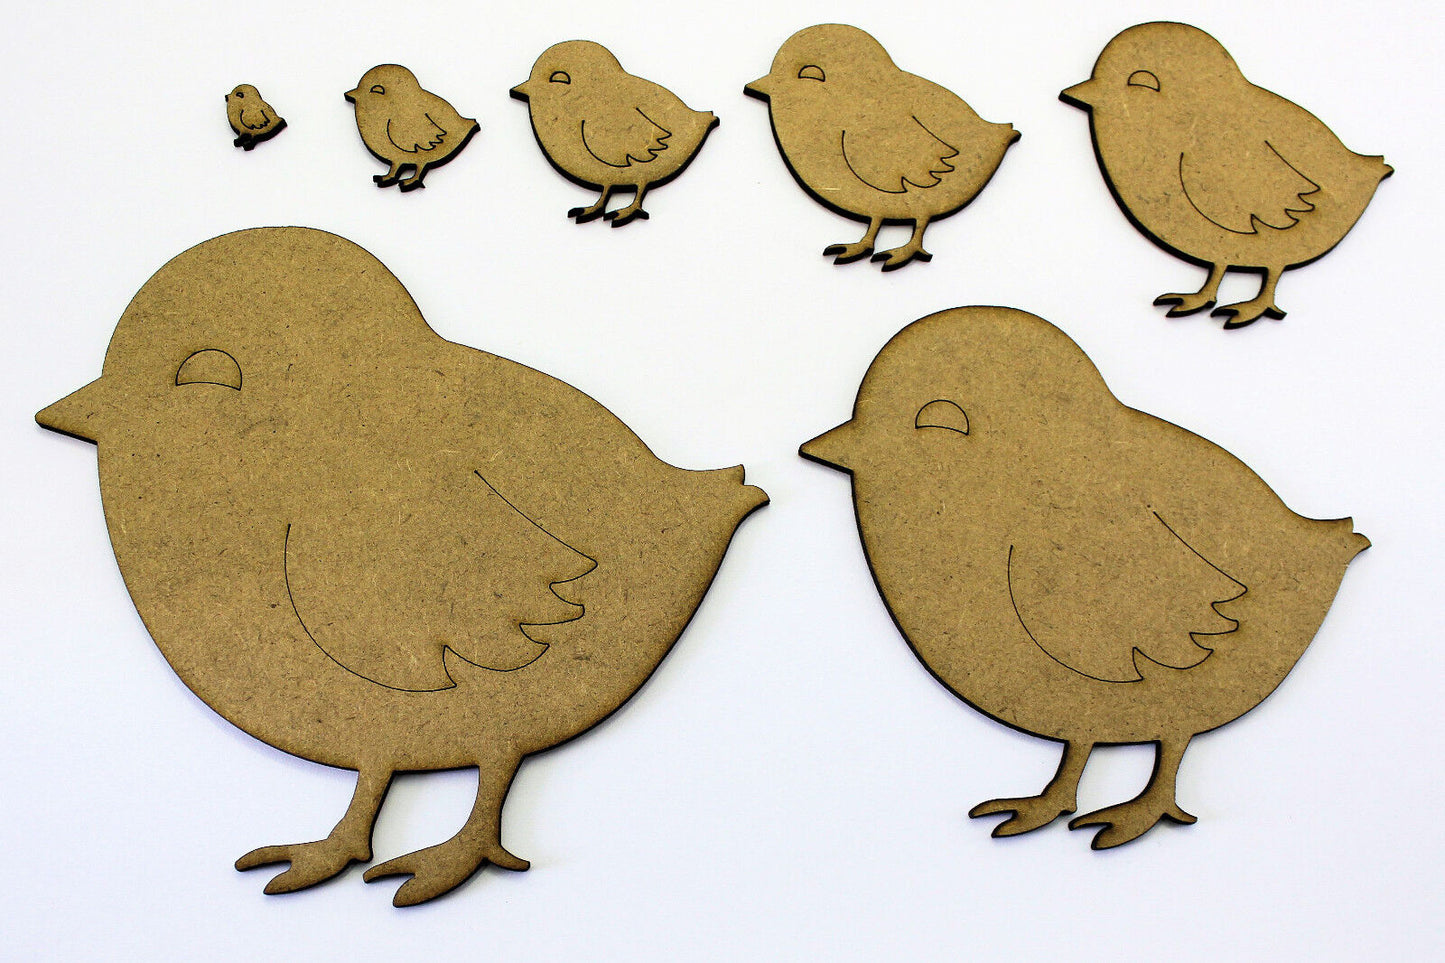 Easter Chick / Chicken Craft Shapes, Embellishments, Tags, 2mm MDF Wood